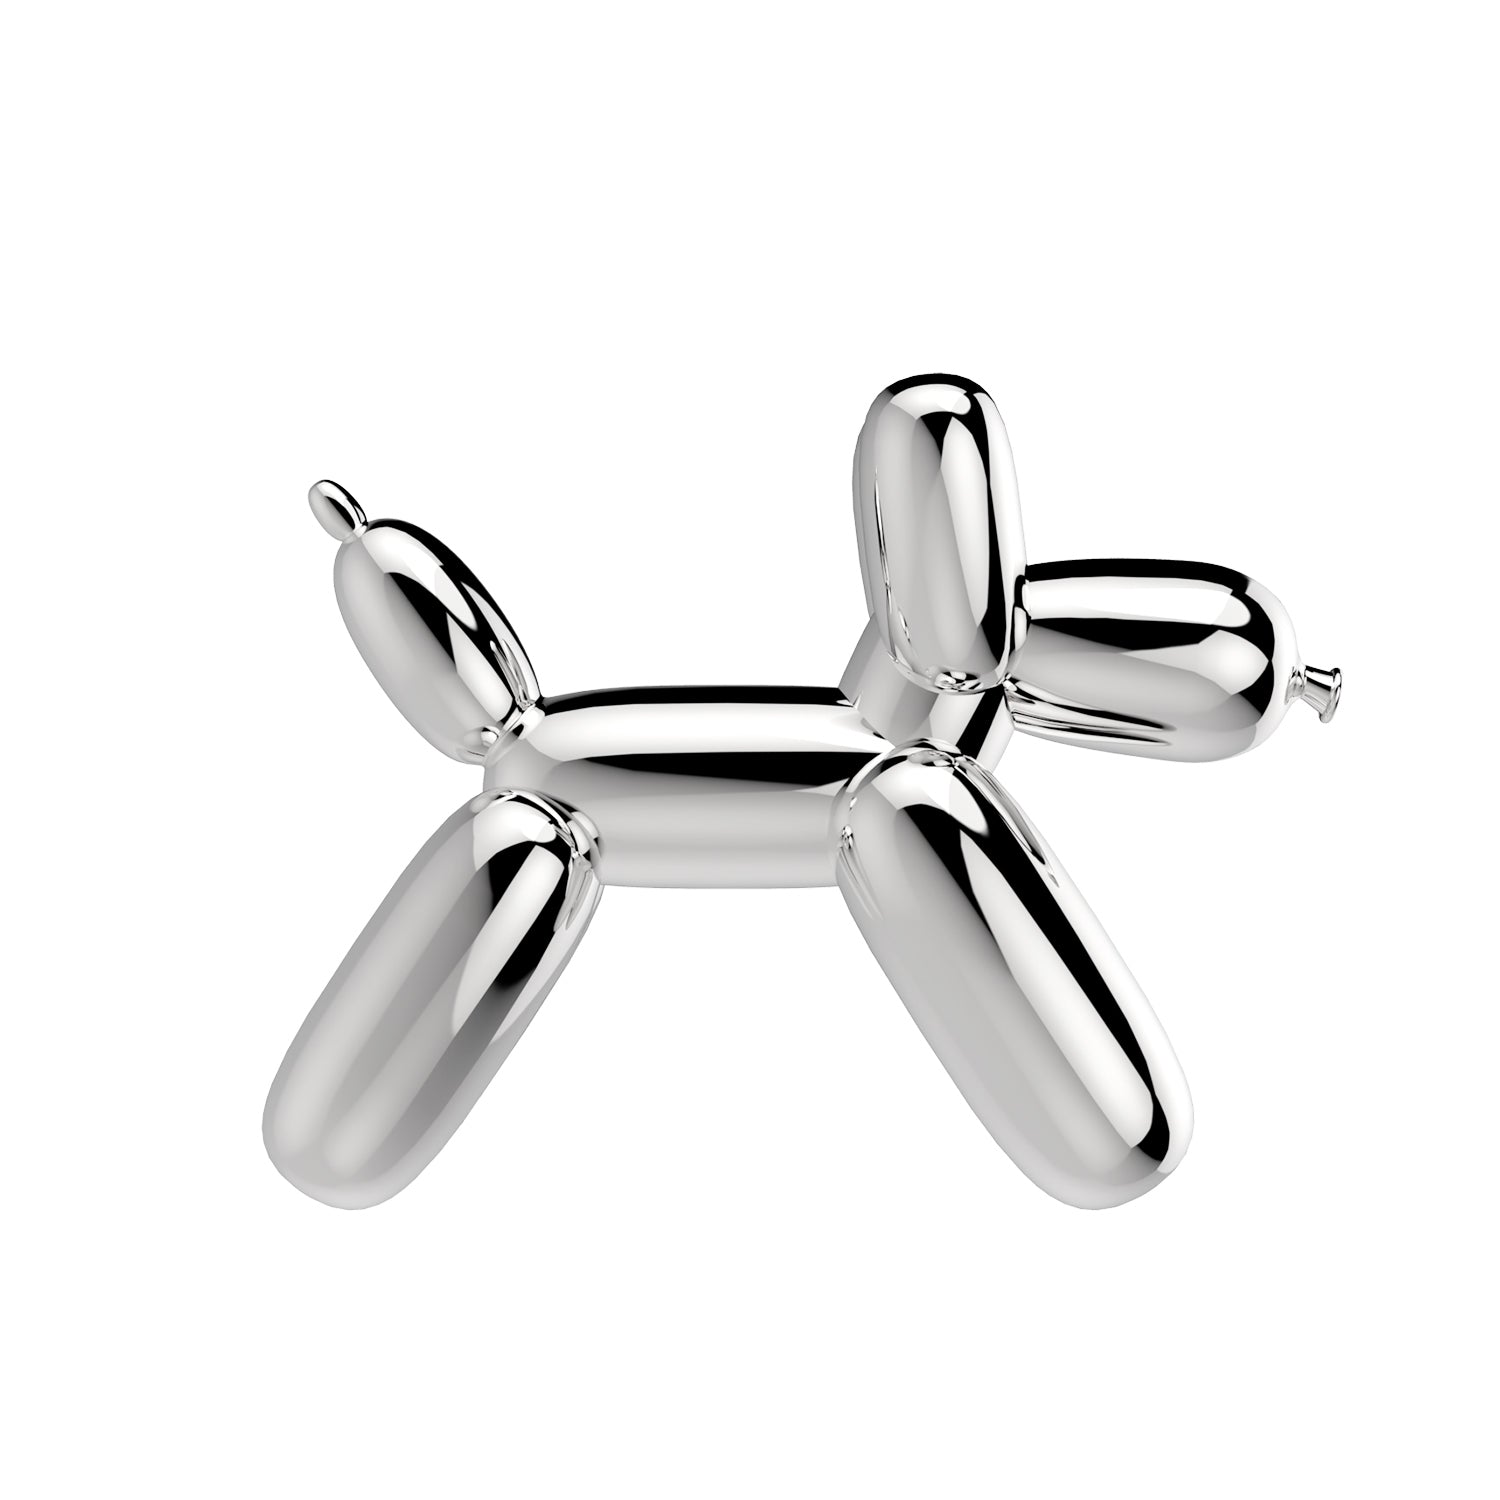 Steti Zinc Alloy Balloon Dog Magnet and Photo Holder, In Silver and Bl –  Steti Inc